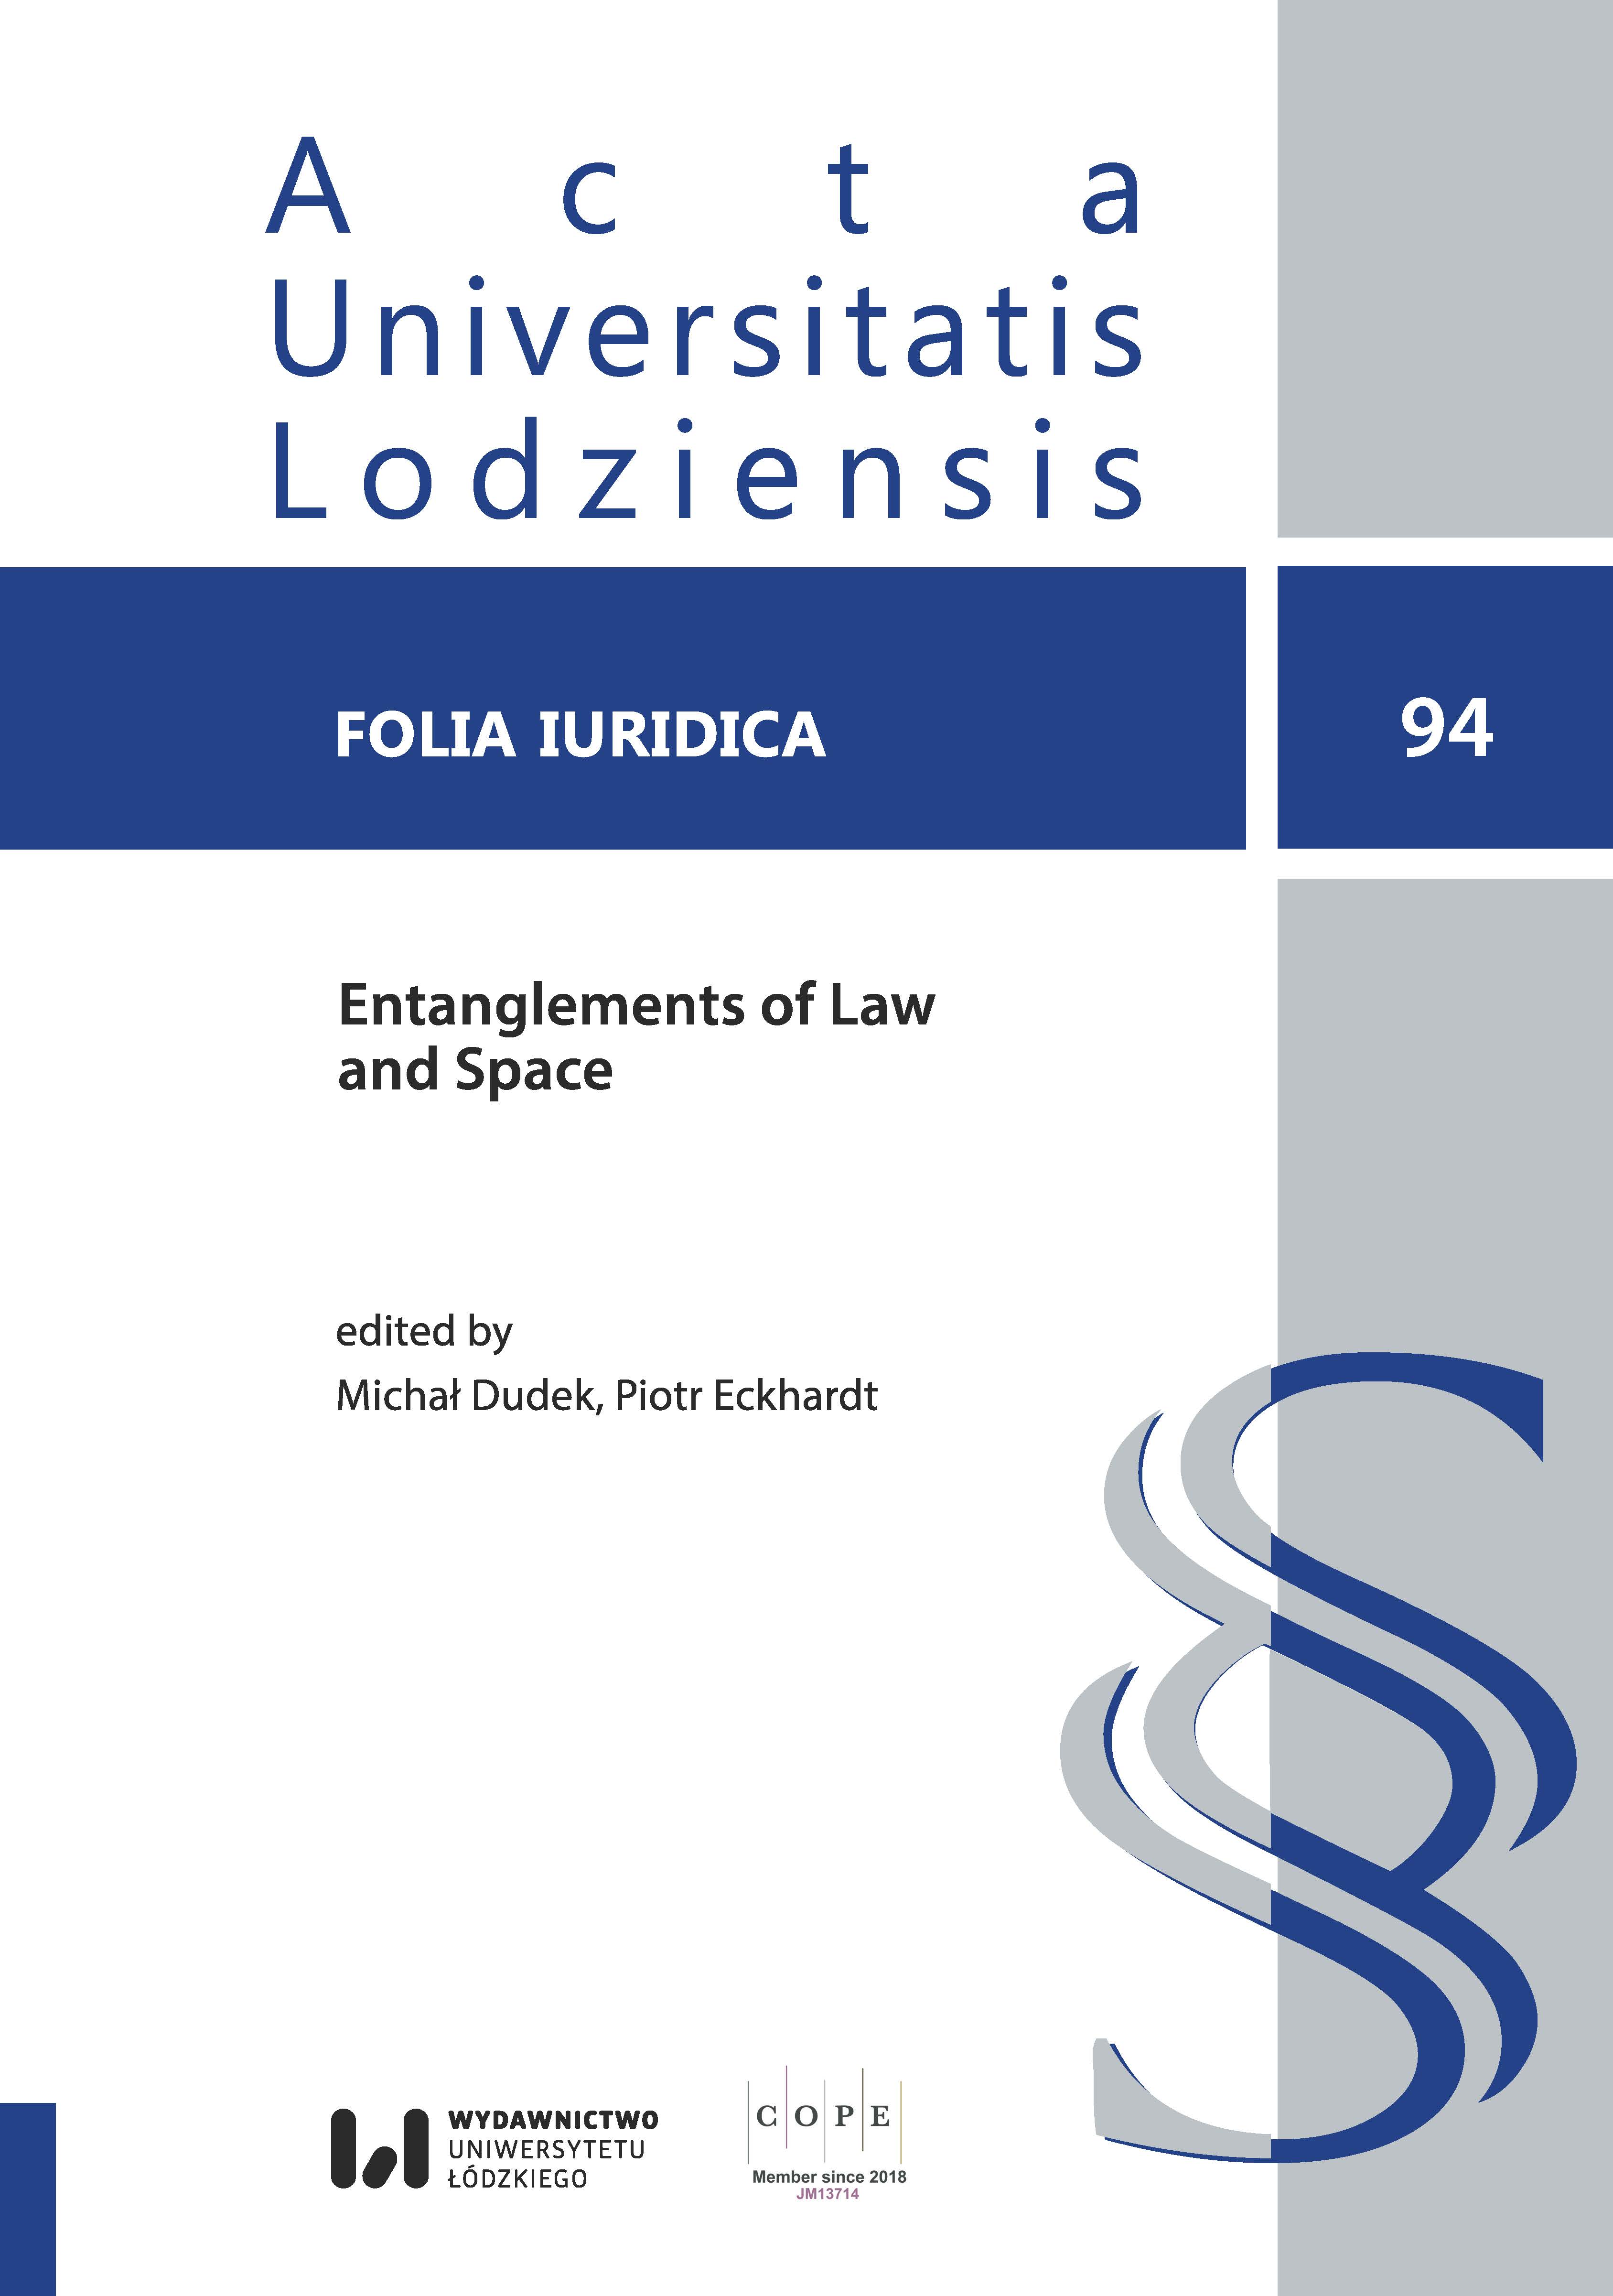 					View Vol. 94 (2021): Entanglements of Law and Space
				